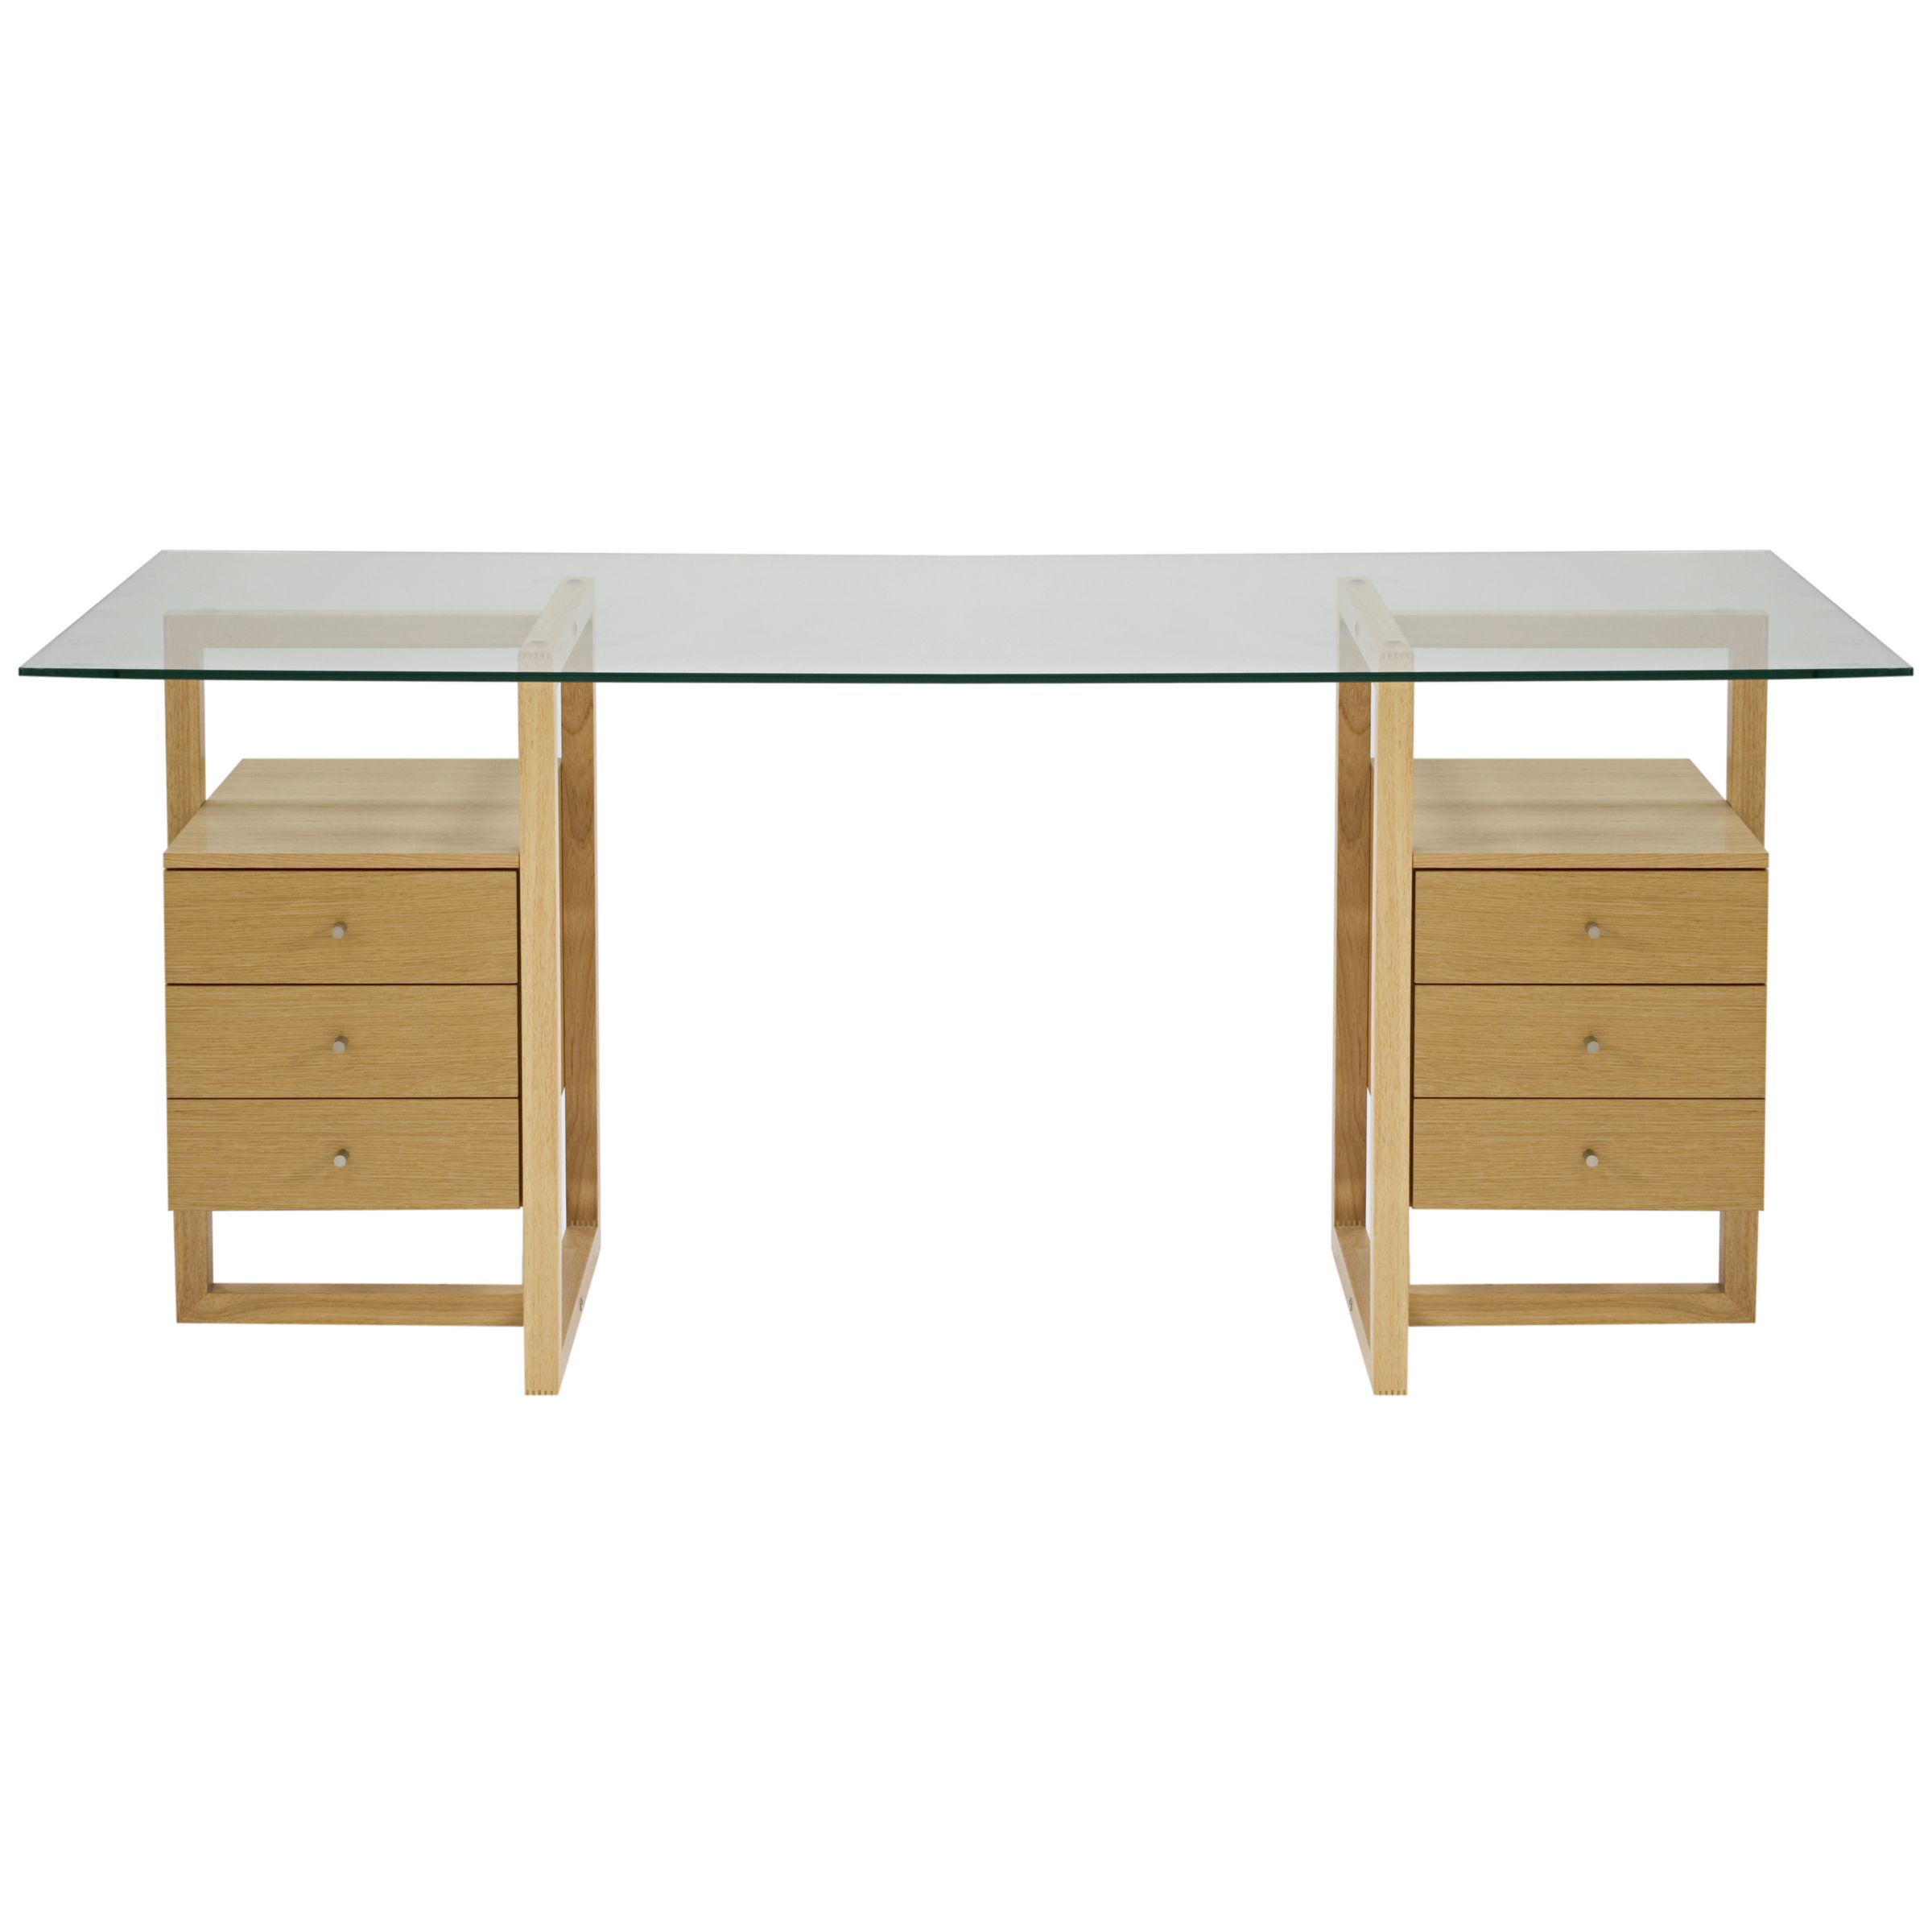 John Lewis Staten Small Glass Desk with Oak Trestle and 2 Drawer Packs